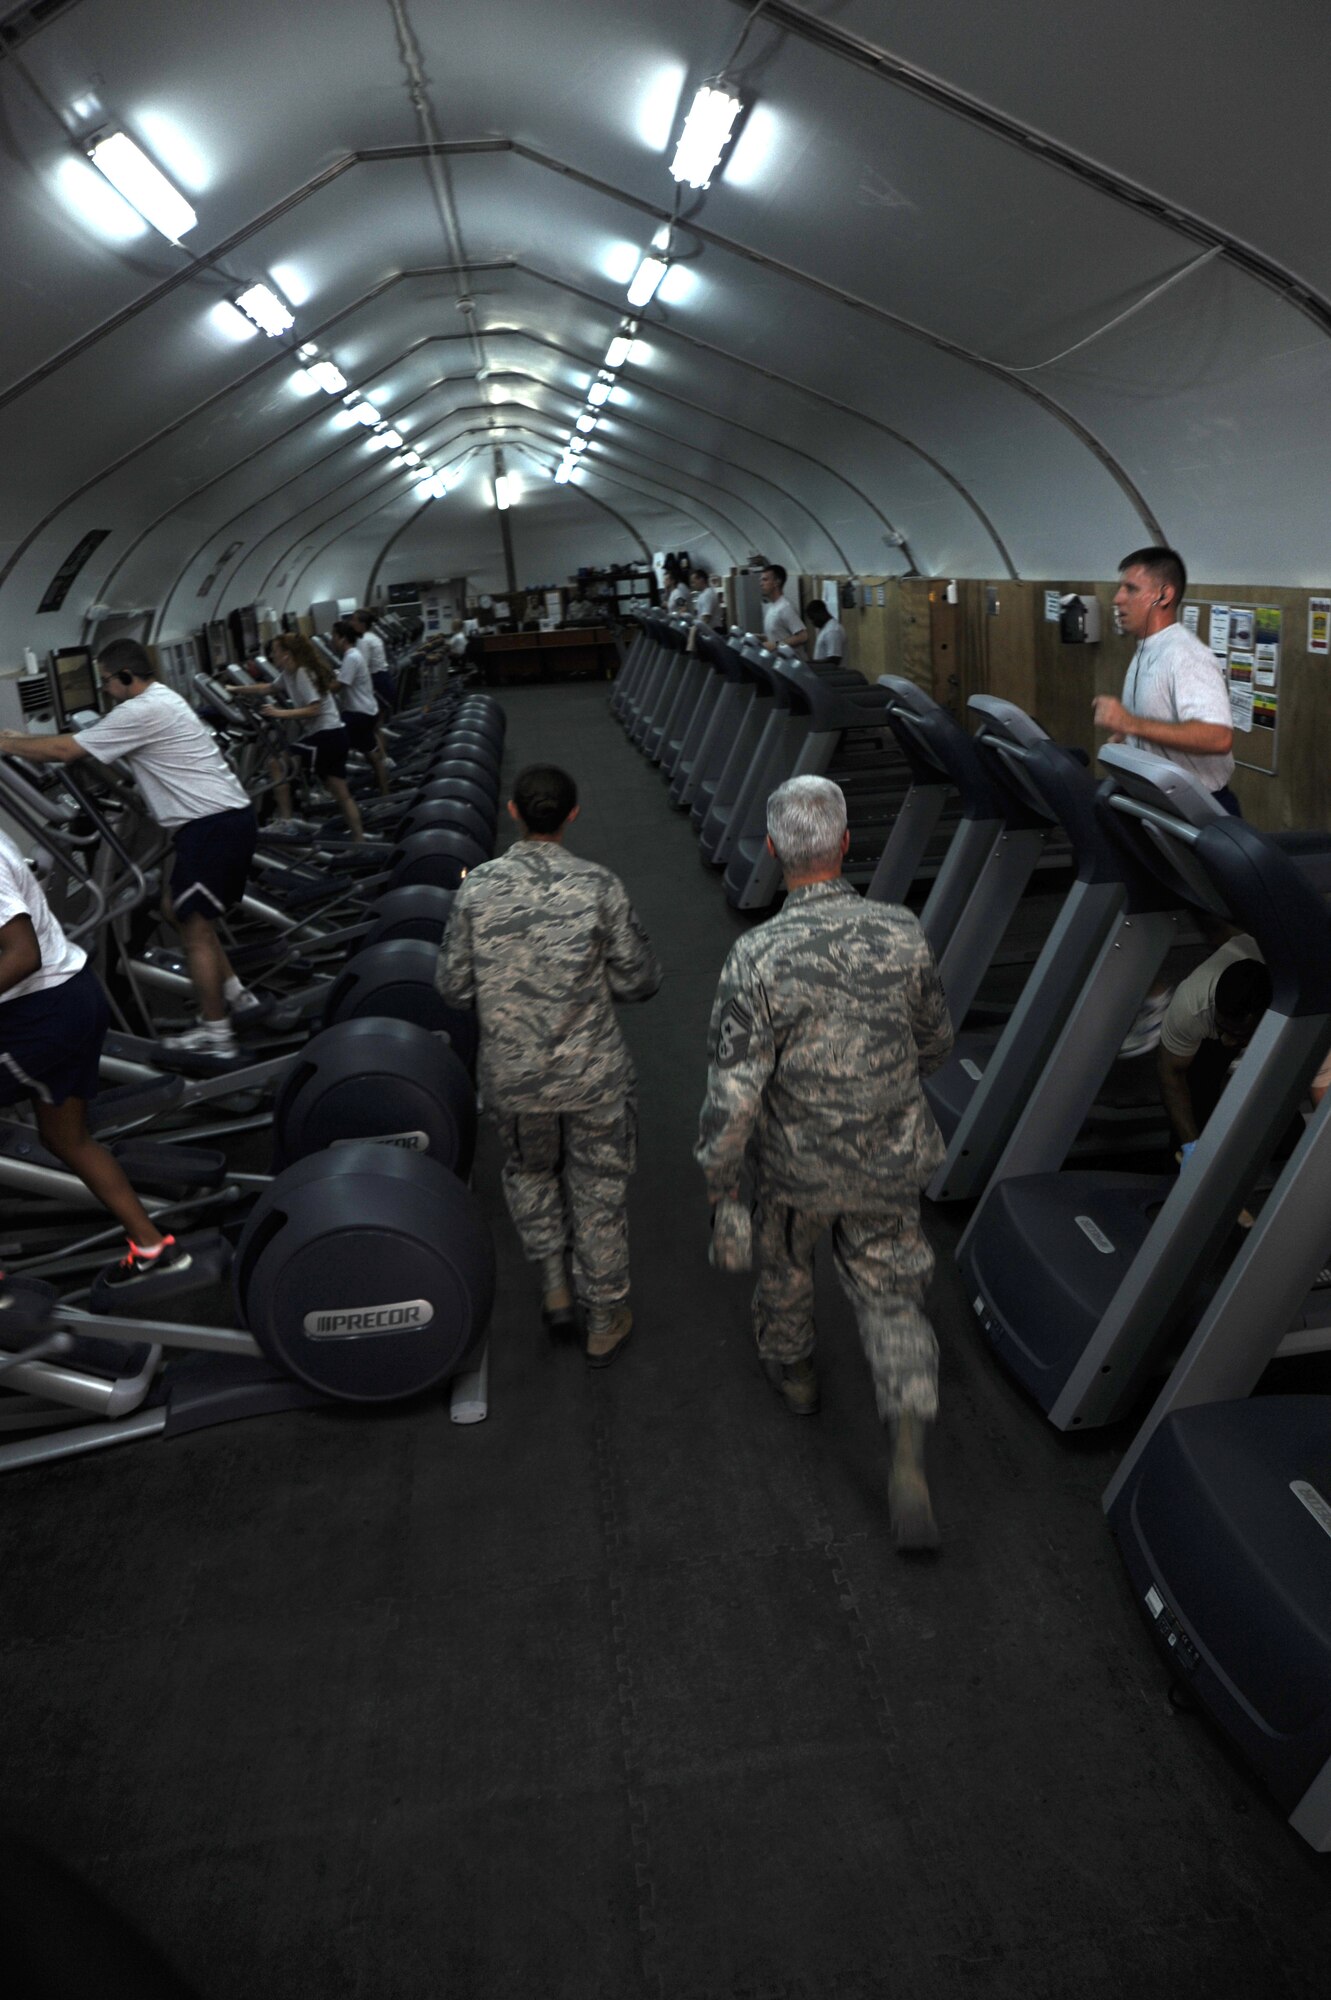 SOUTHWEST ASIA -- Chief Master Sgt. Robert Sealey gets a tour of fitness facilities from Master Sgt. Lauralee Okoniewski May 22, 2012. Sealey, the U.S. Air Forces Central command chief master sergeant, spoke with several groups of Airmen during his two-day visit to the 380th Air Expeditionary Wing. Okoniewski is a Walnut Ridge, Ark., native deployed from Scott Air Force Base, Ill. (U.S. Air Force photo/Staff Sgt. J.G. Buzanowski)